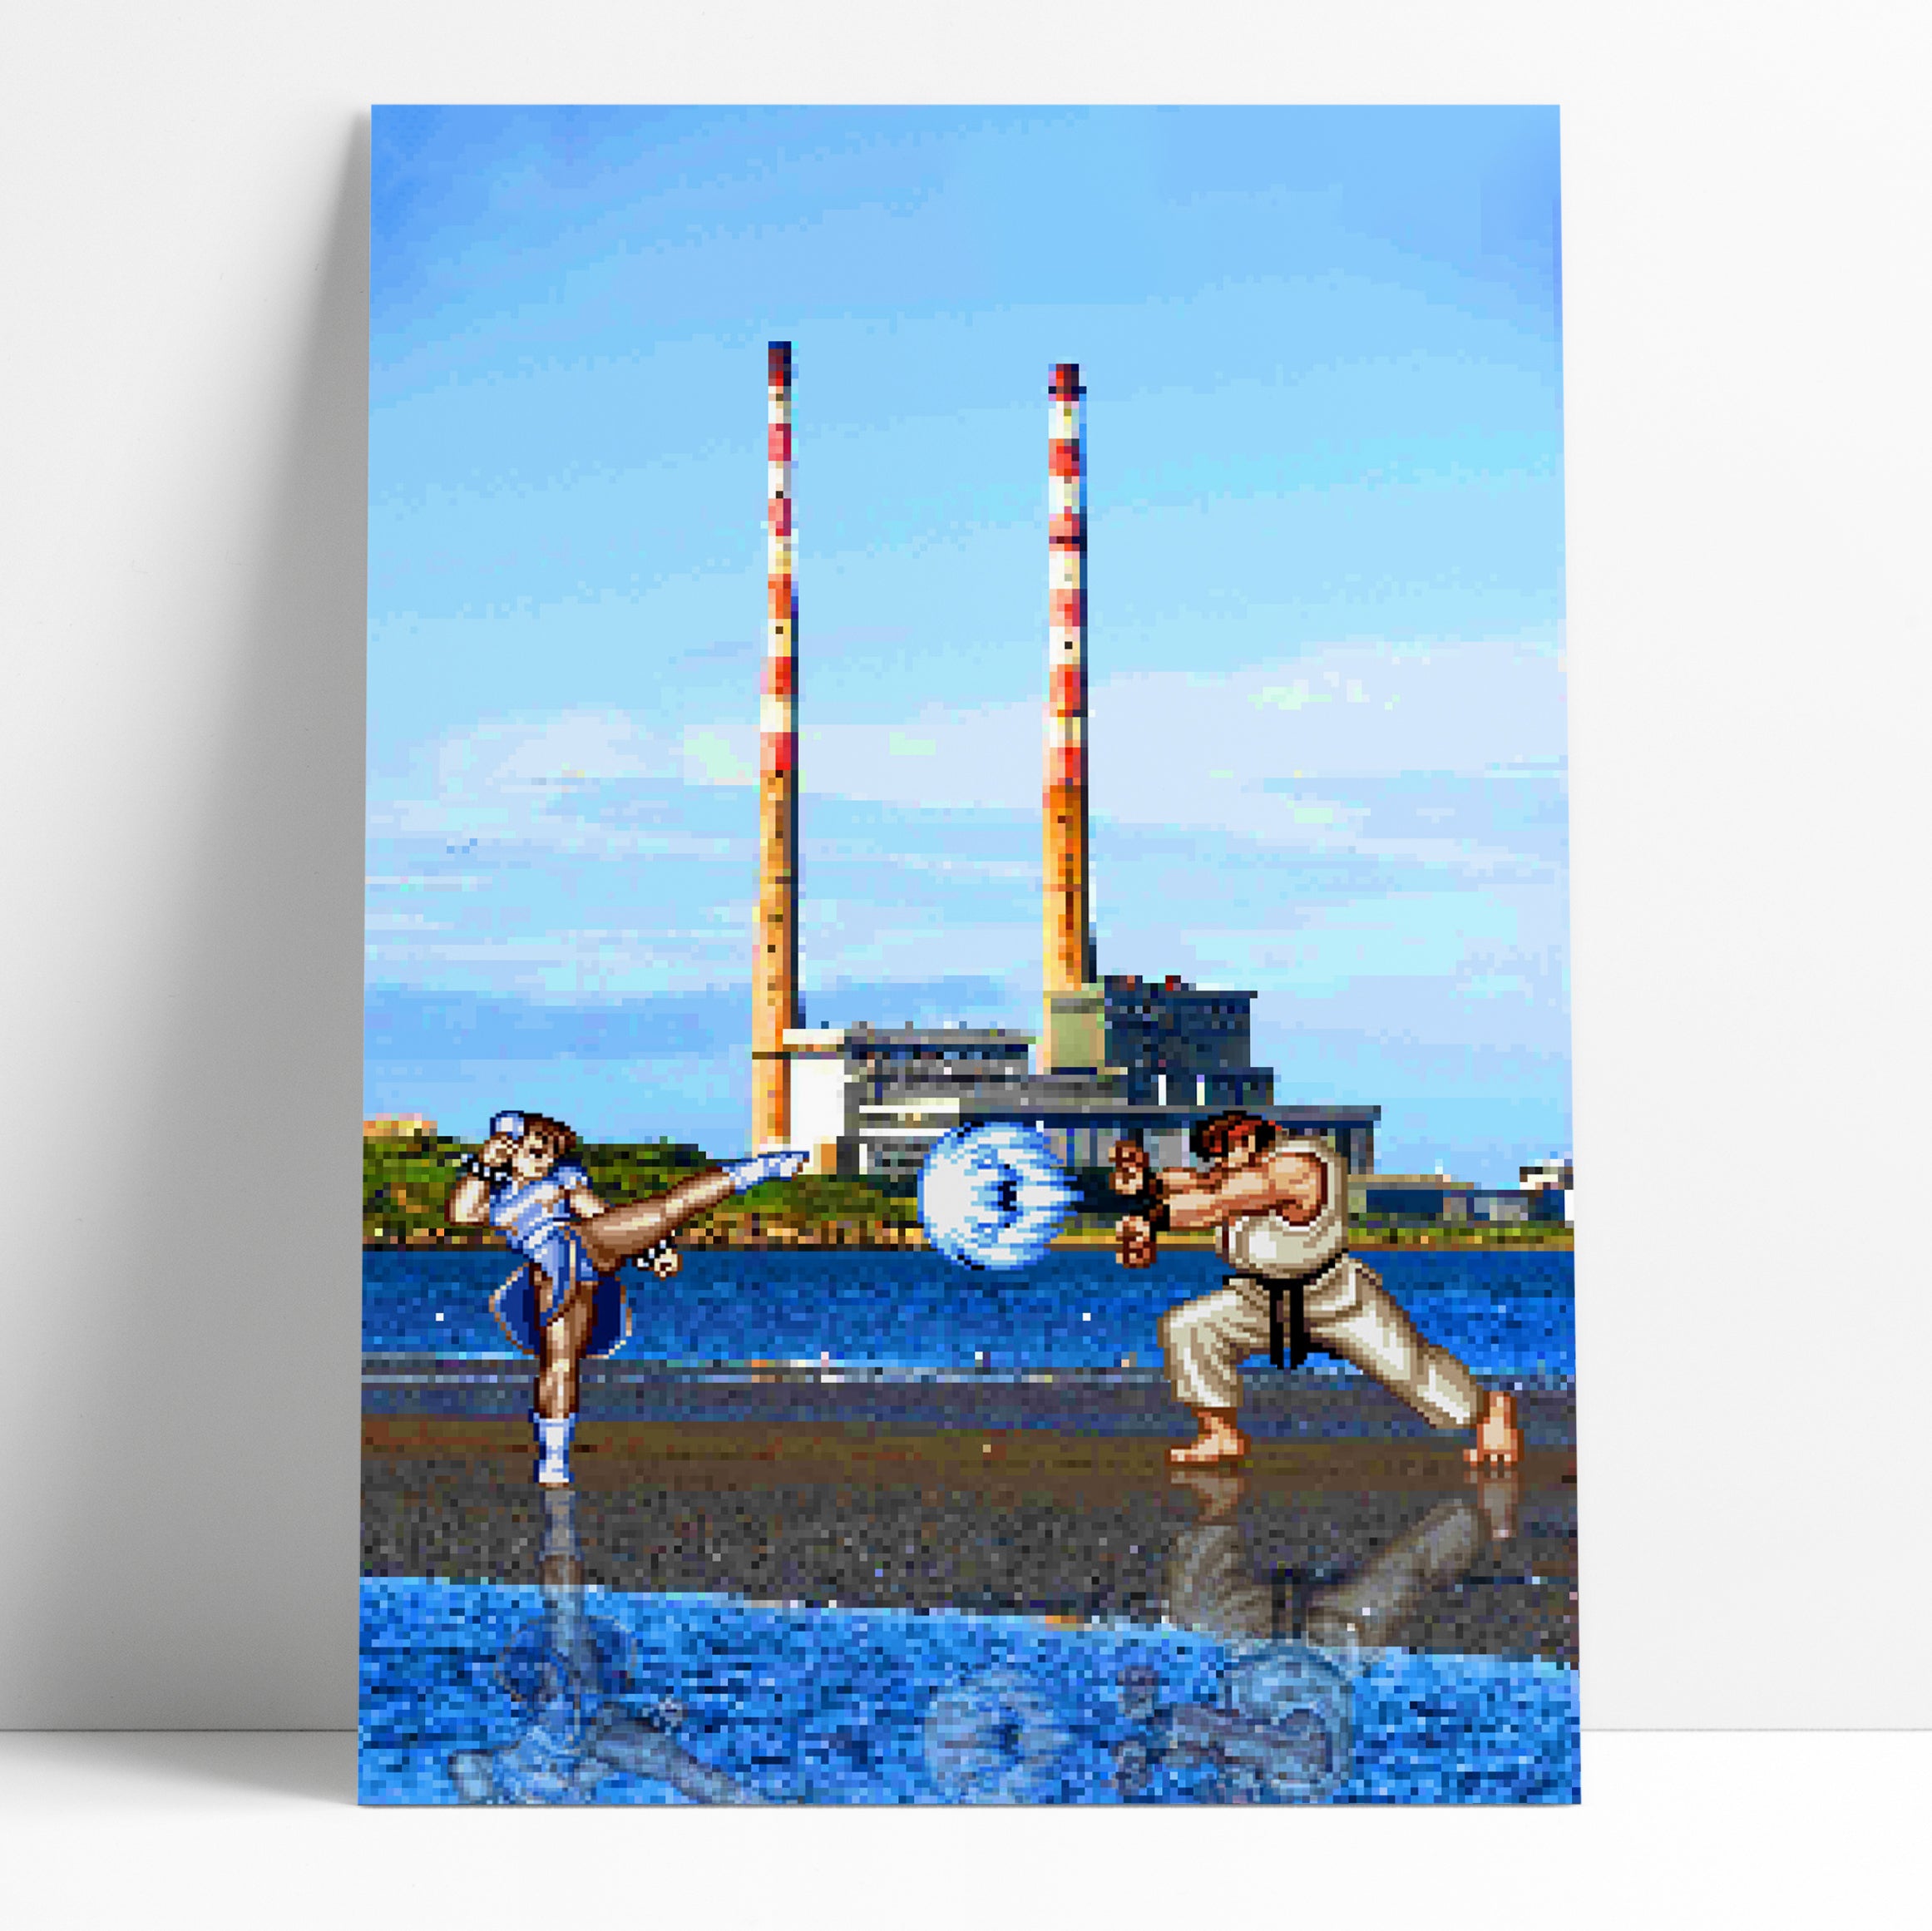 Streetfighter Poolbeg (A4 Print)